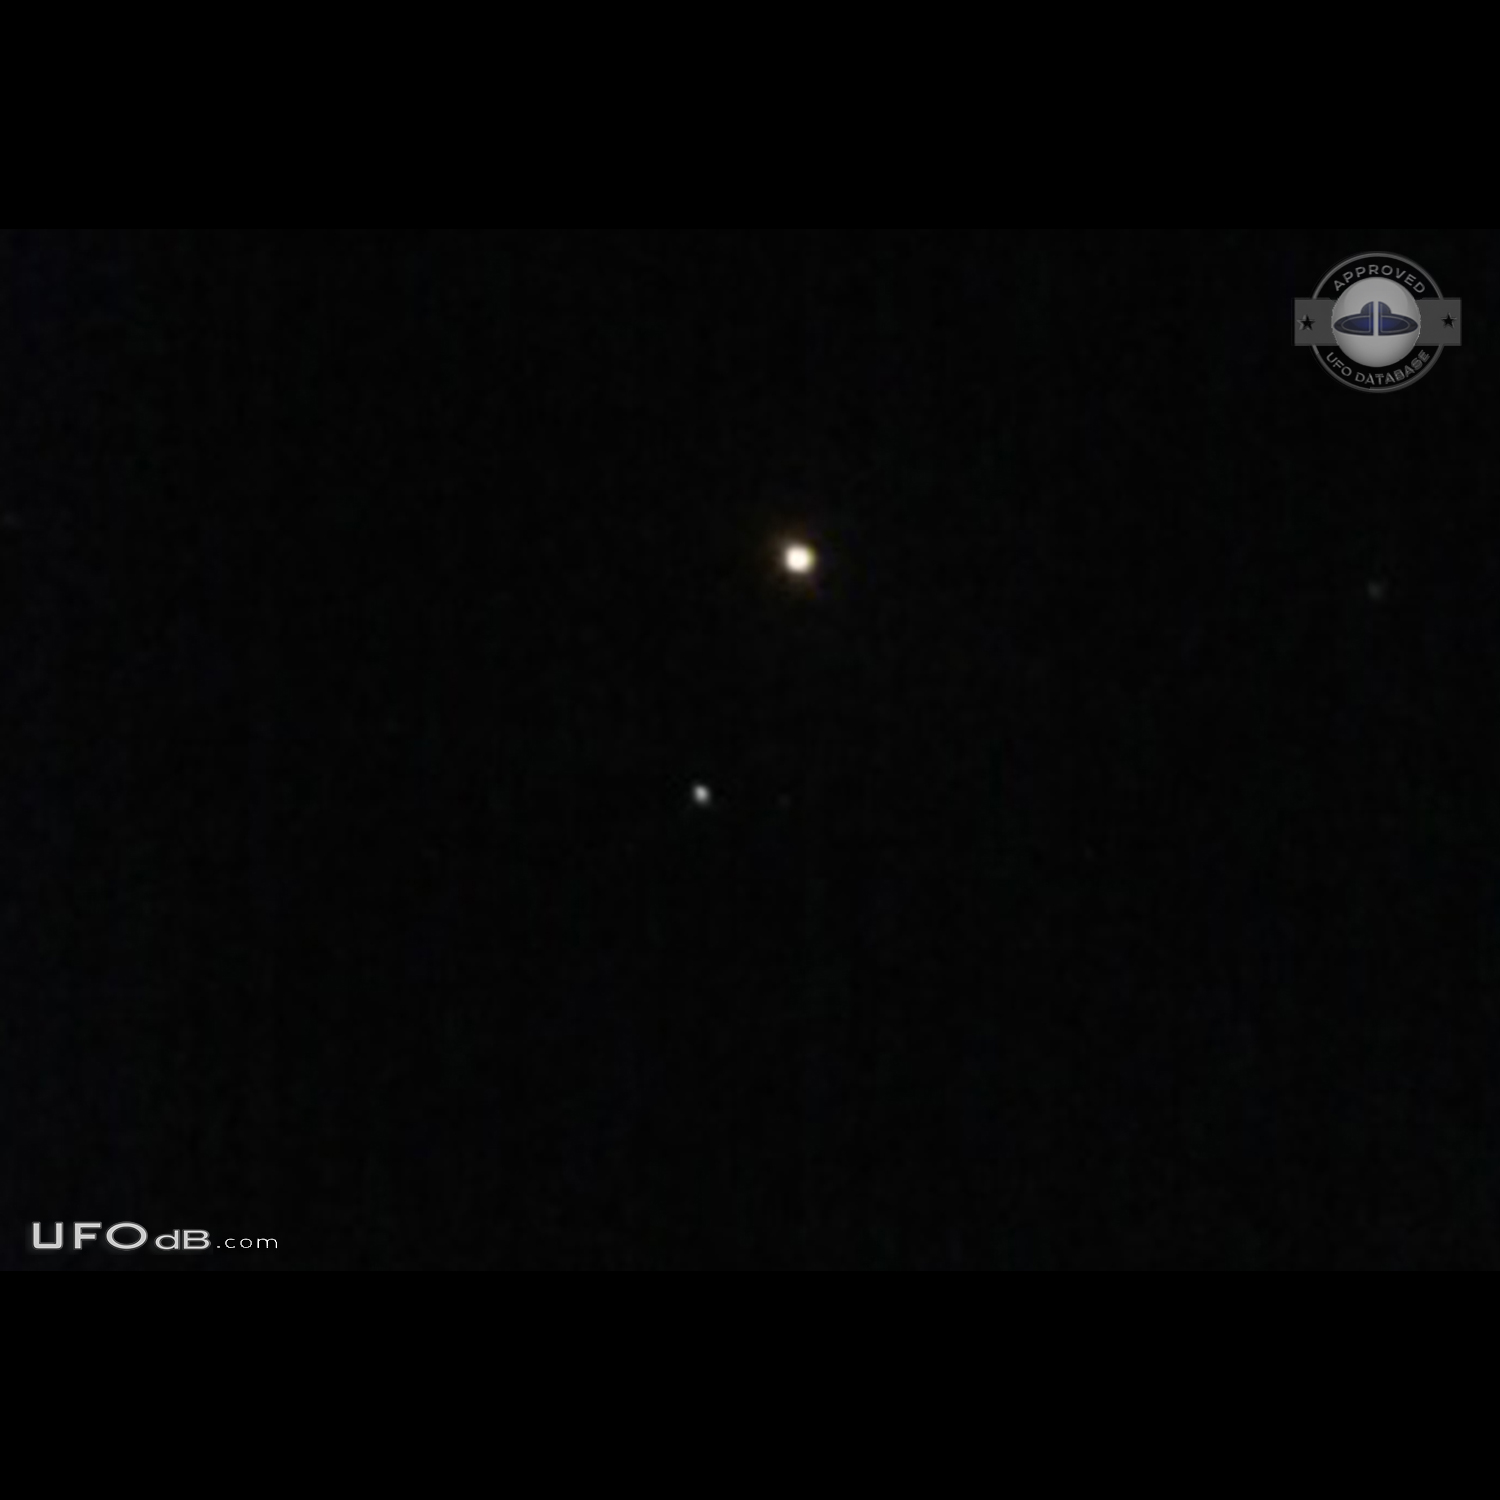 Multi colored triangle with 3 smaller orbs UFOS - Florida USA 2015 UFO Picture #679-1